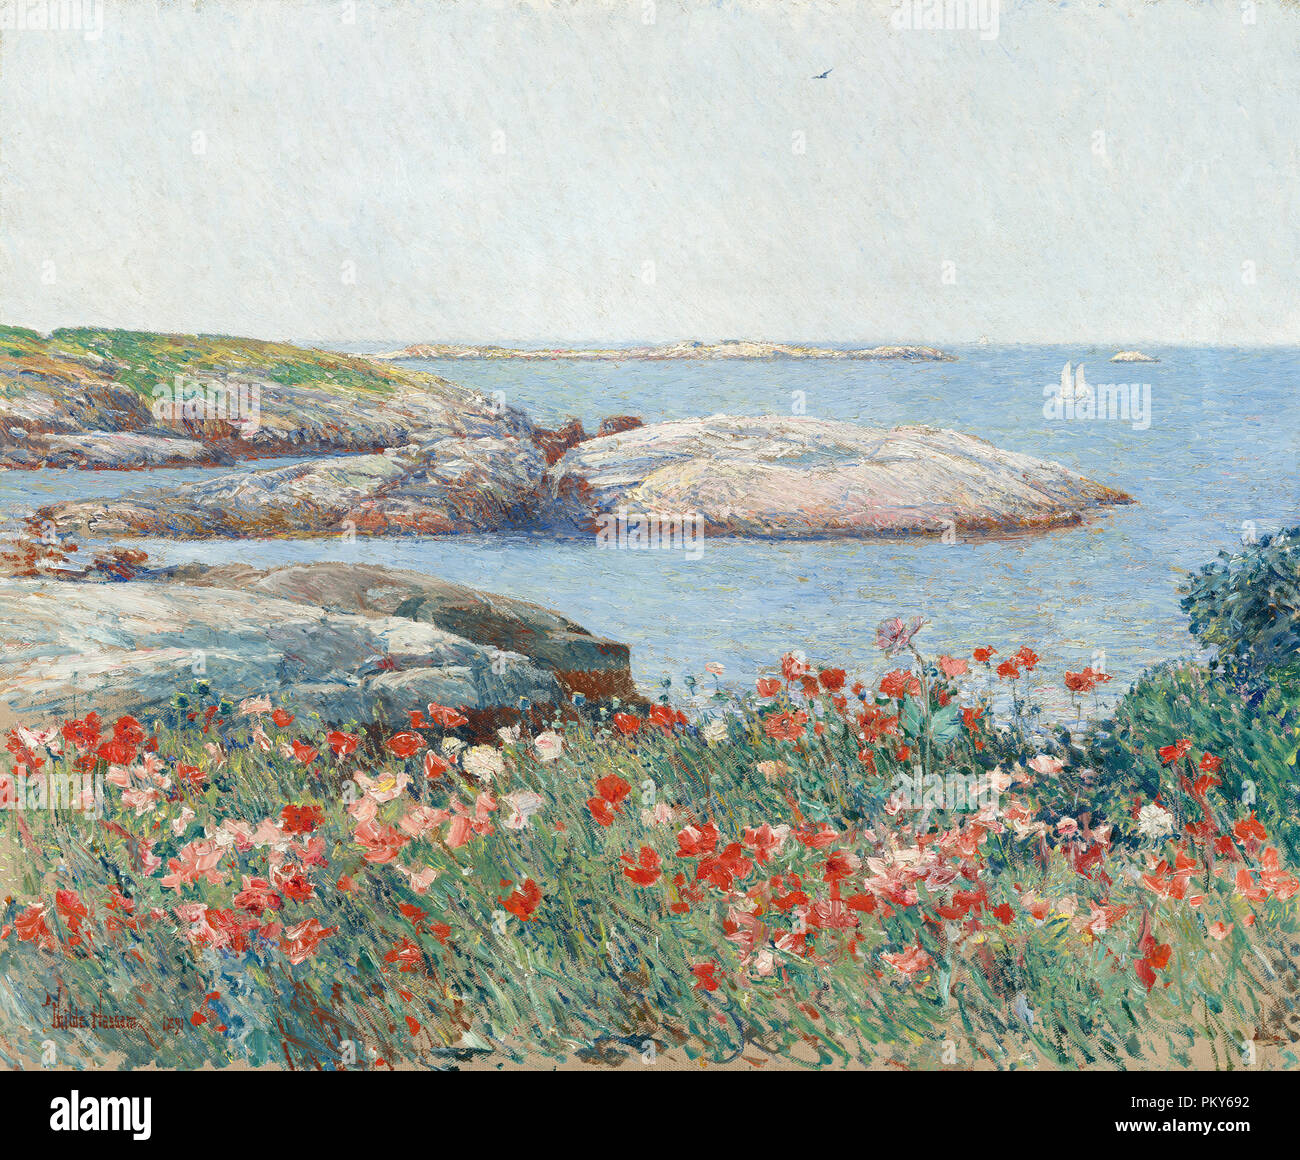 Poppies, Isles of Shoals. Dated: 1891. Dimensions: overall: 50.2 x 61 cm (19 3/4 x 24 in.)  framed: 73.5 x 83.8 x 6.7 cm (28 15/16 x 33 x 2 5/8 in.). Medium: oil on canvas. Museum: National Gallery of Art, Washington DC. Author: Childe Hassam. Stock Photo